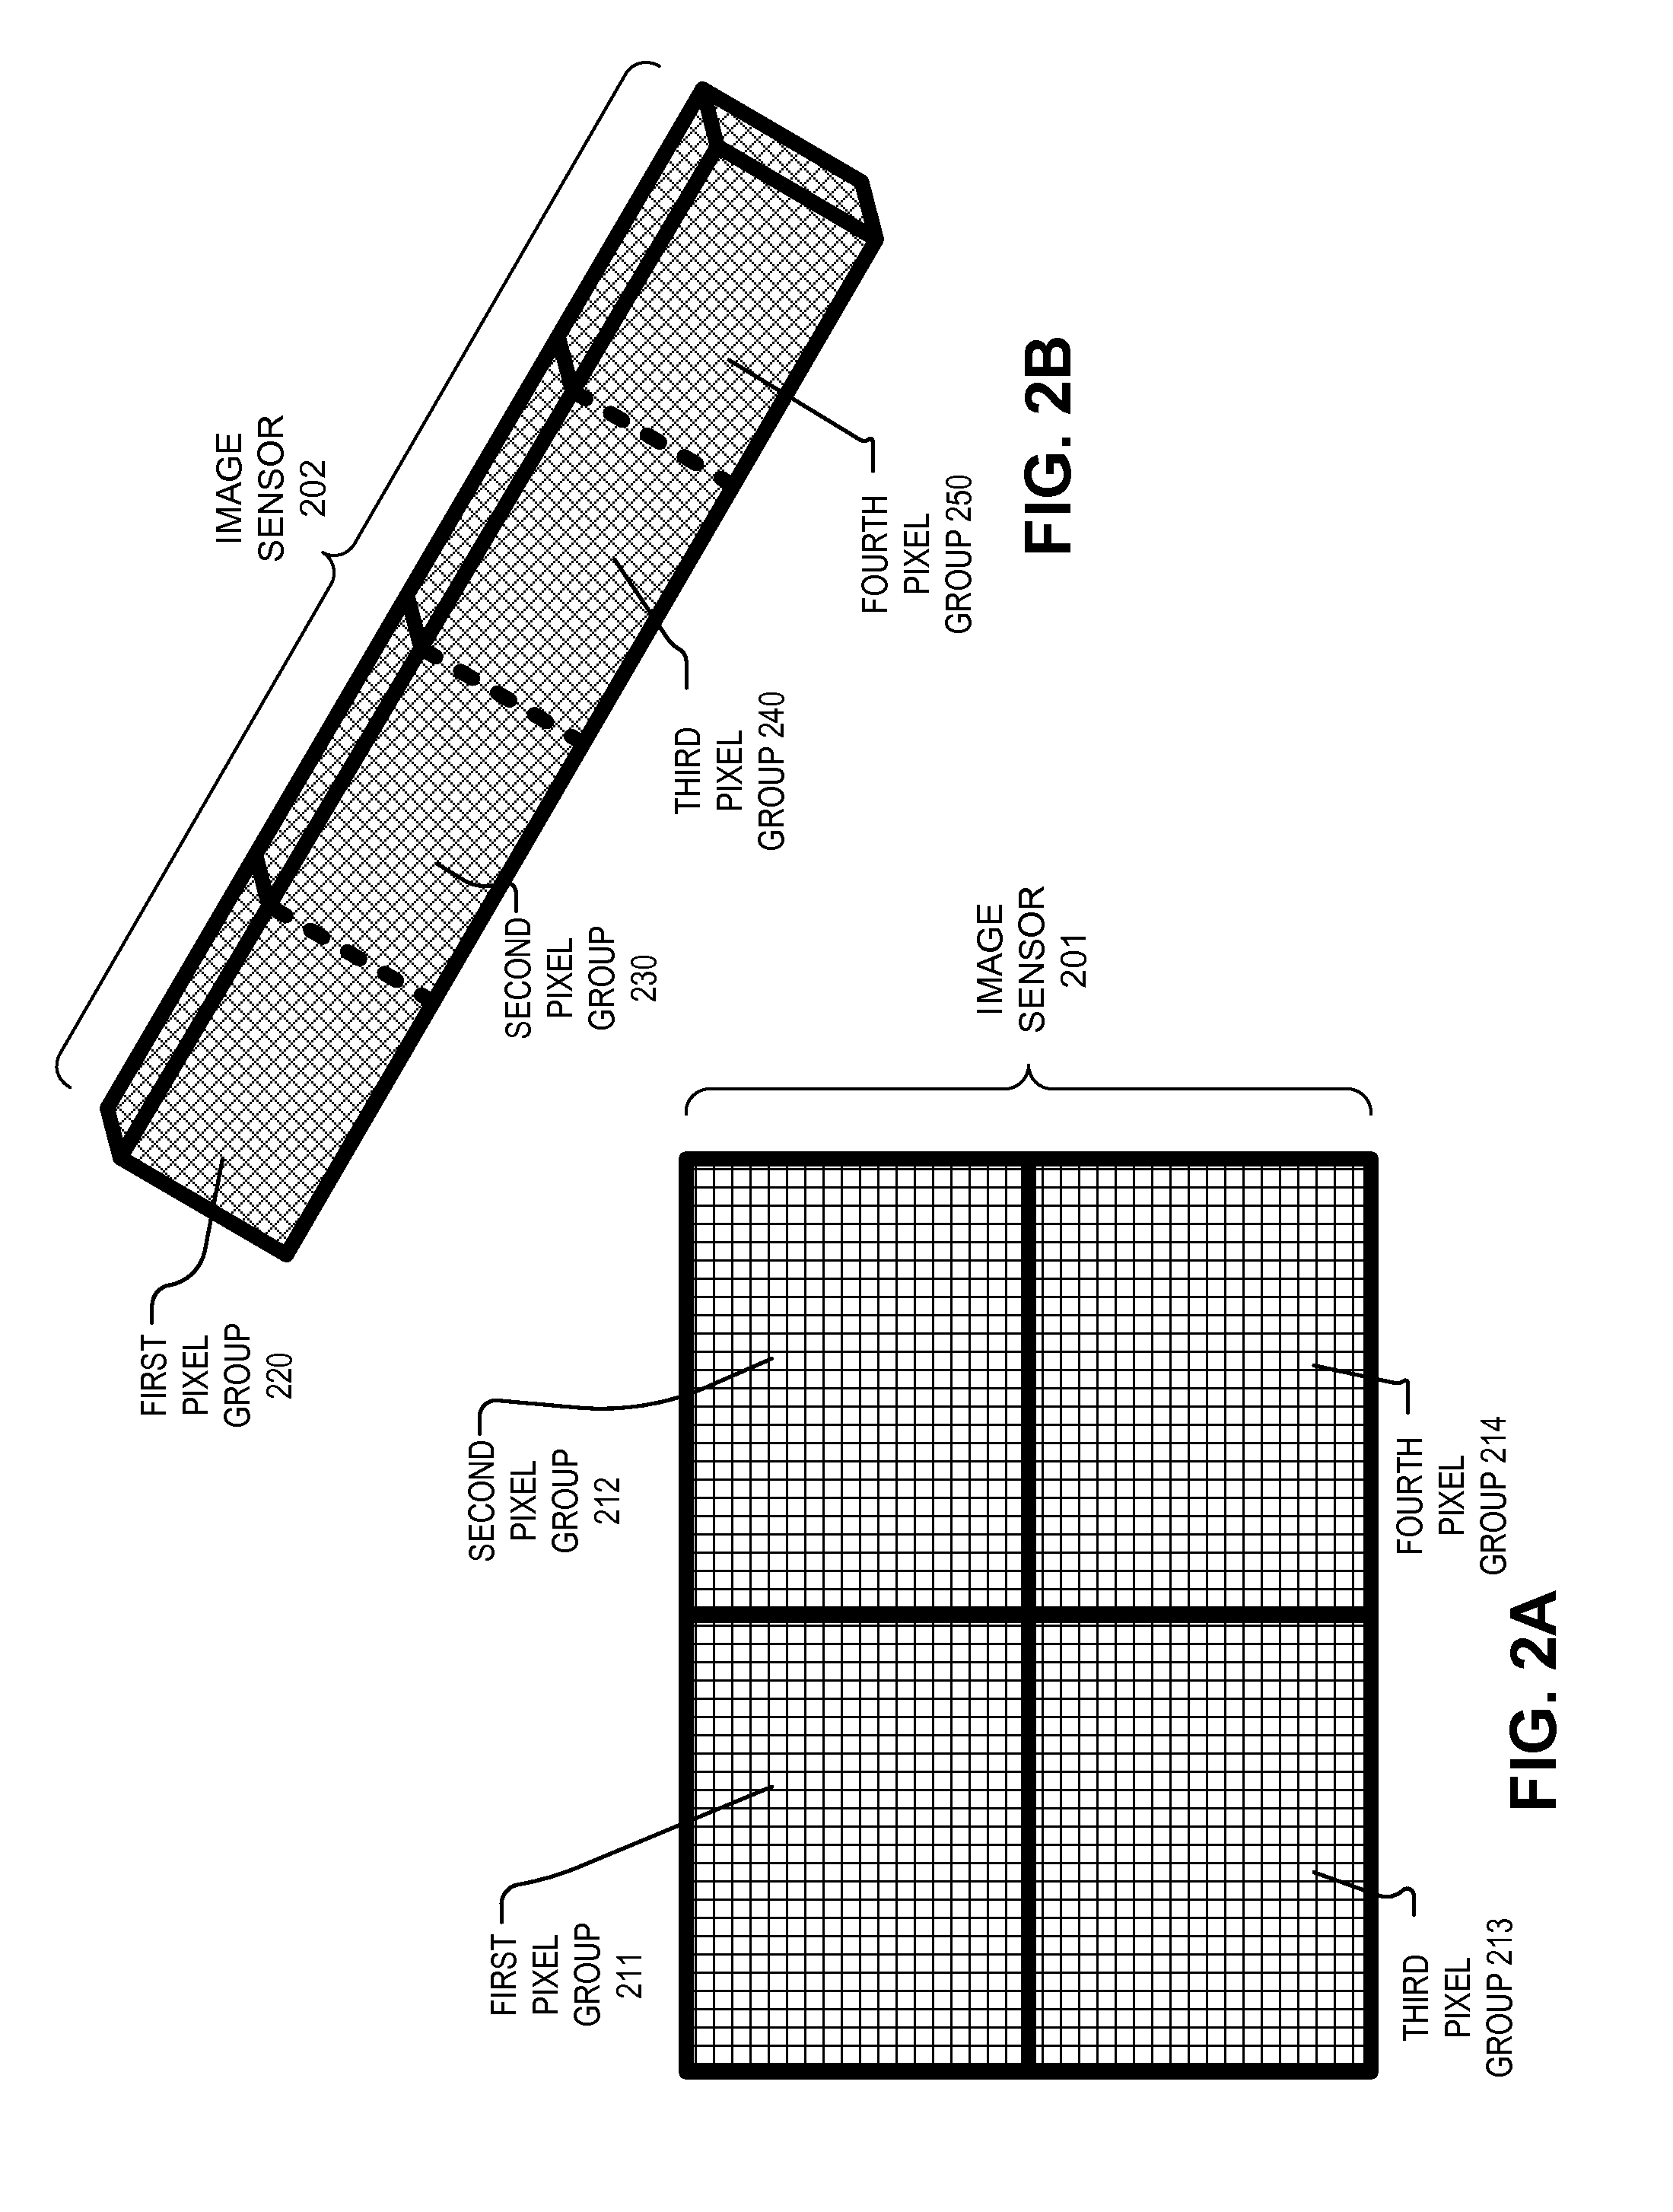 Imaging device with a plurality of pixel arrays